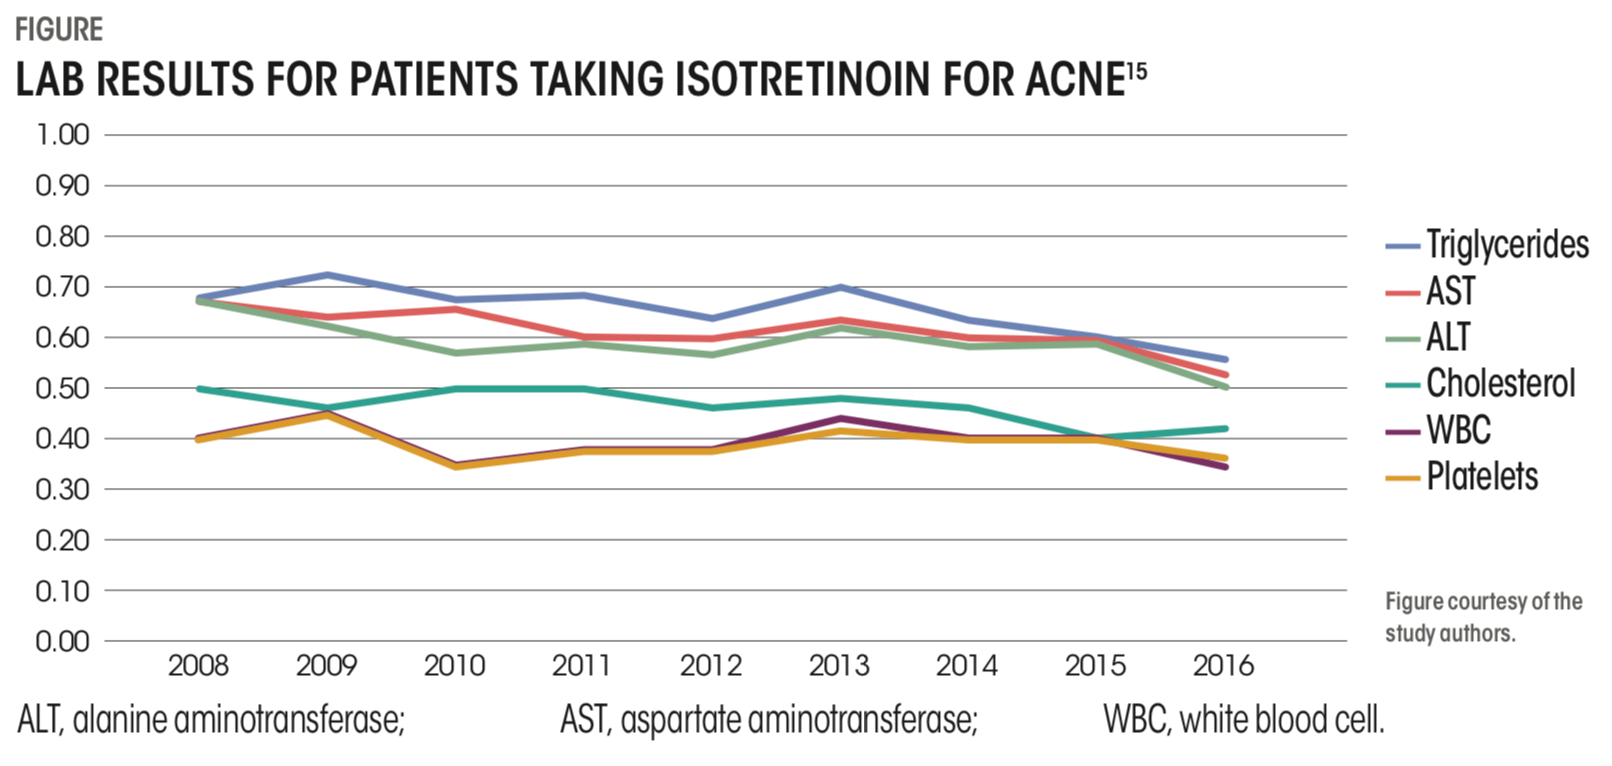 LAB RESULTS FOR PATIENTS TAKING ISOTRETINOIN FOR ACNE